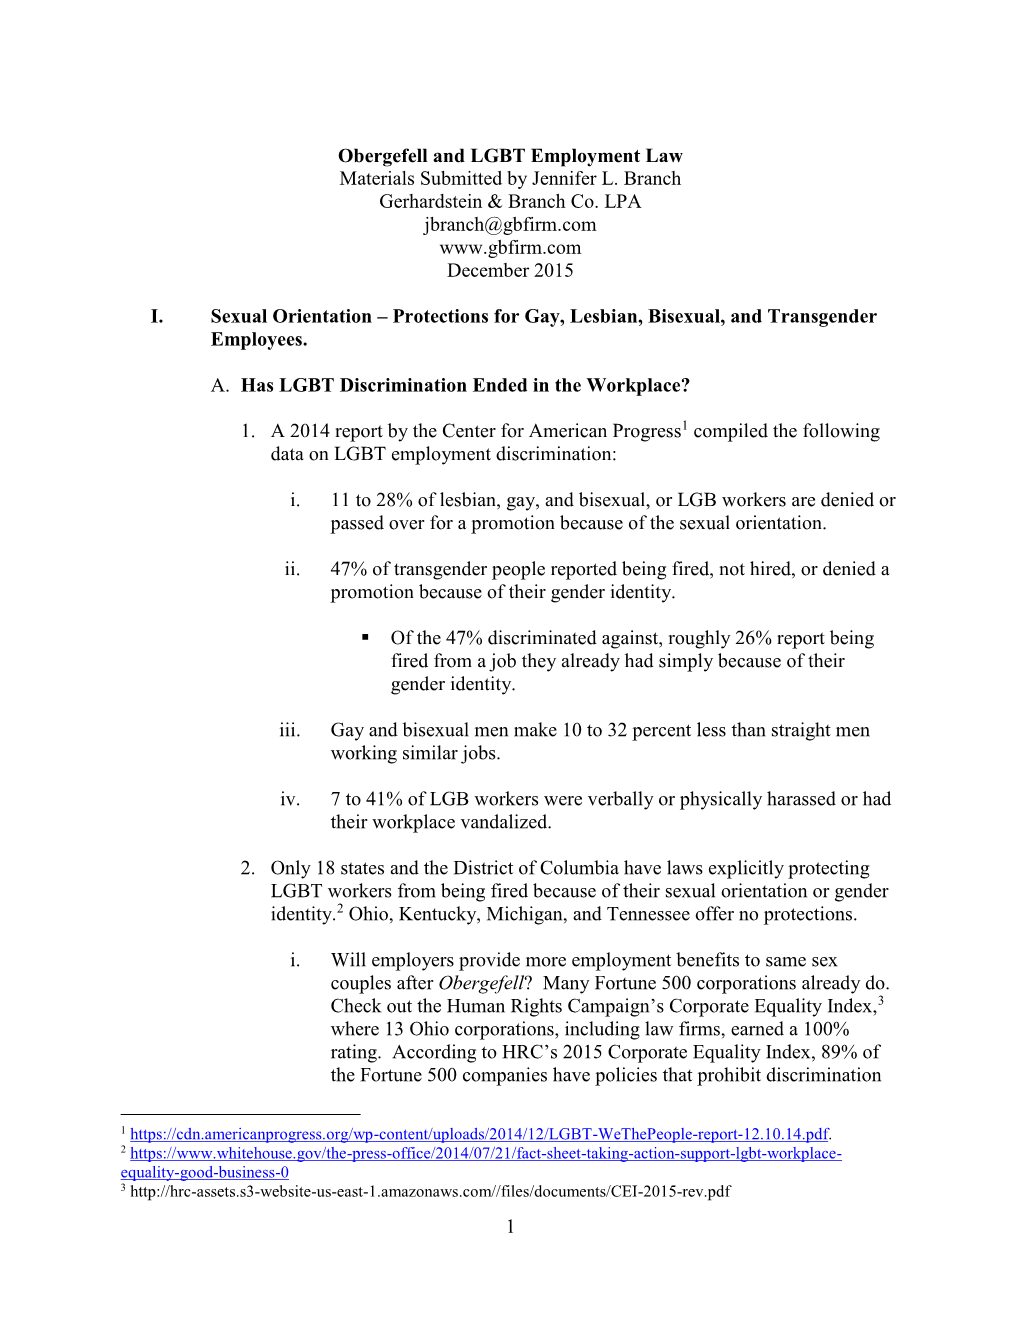 1 Obergefell and LGBT Employment Law Materials Submitted By